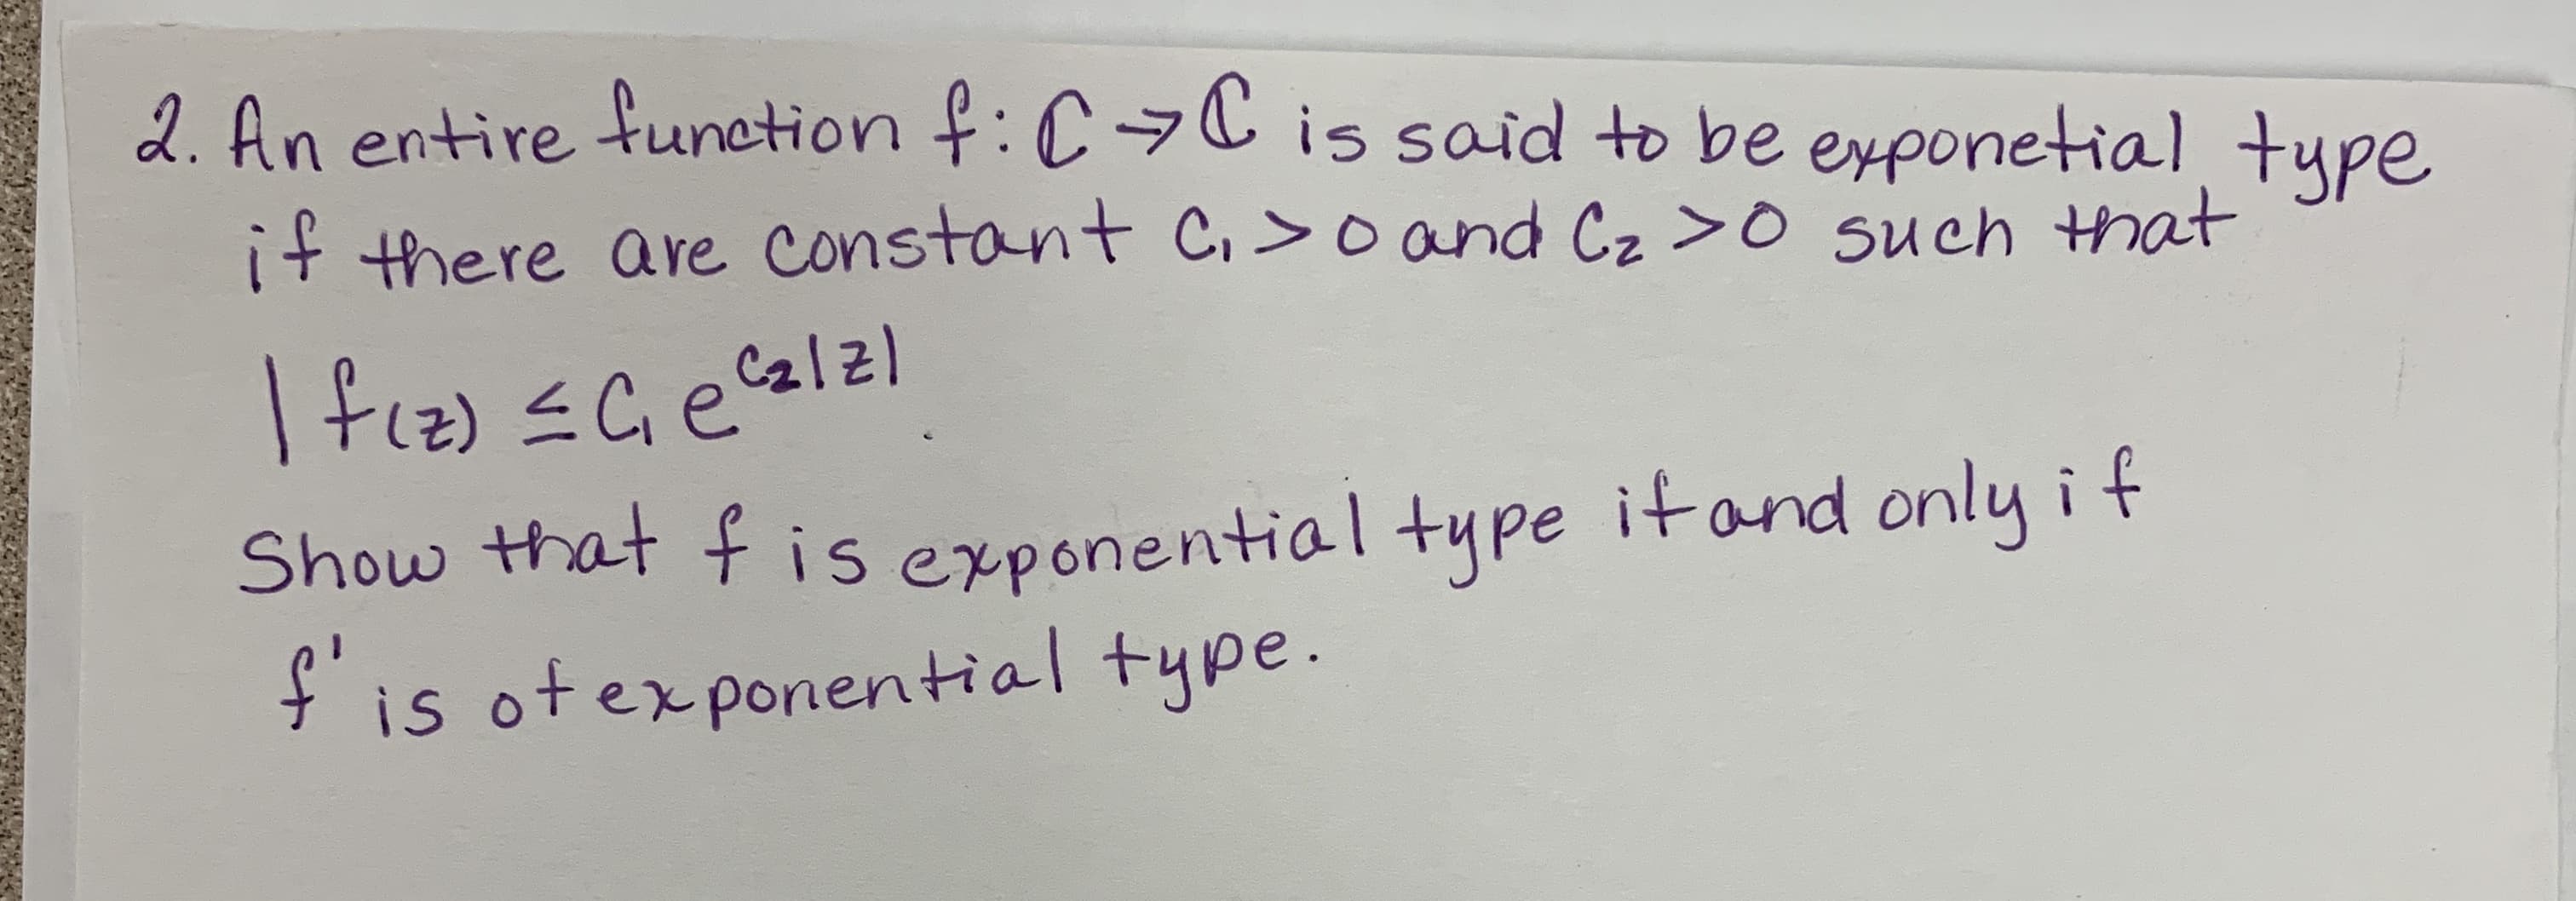 2. An entire function f: CC is said to be exponetial tupe
if there are constant c.> o and Cz > o such t at
Show that f is exponential type itand only i t
fis ot e x ponential type.
